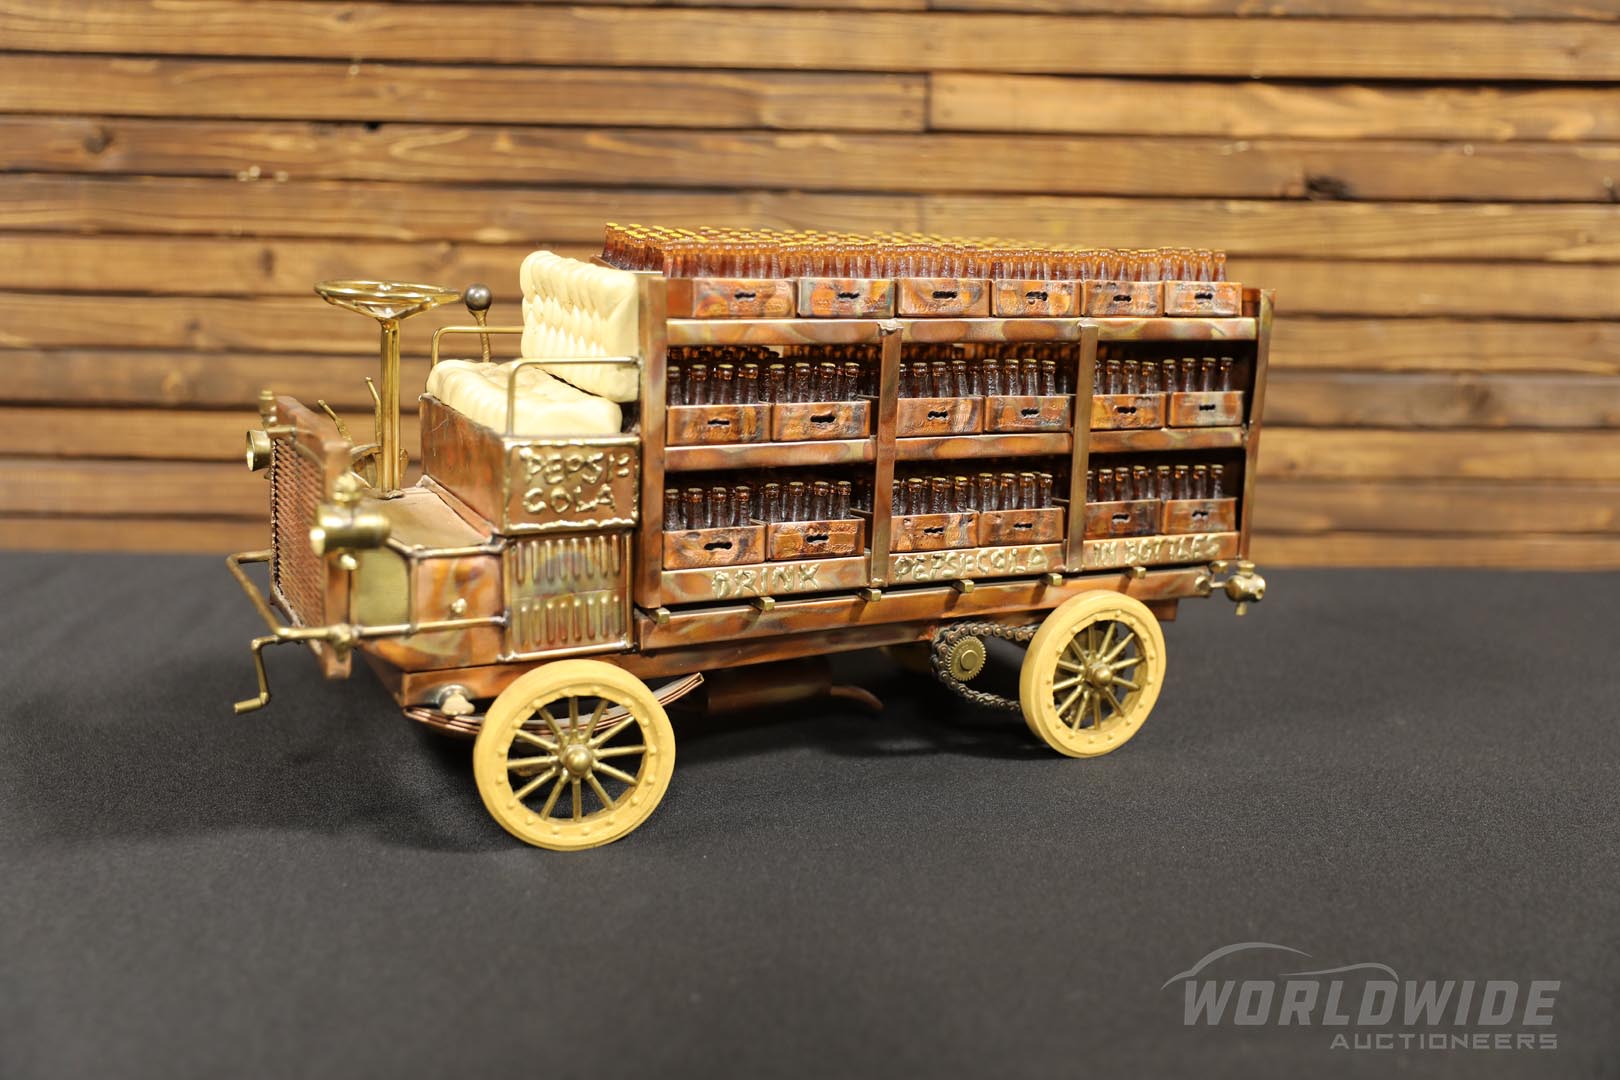 Sculpture of 1905 Autocar Pepsi-Cola Truck by C. Hess